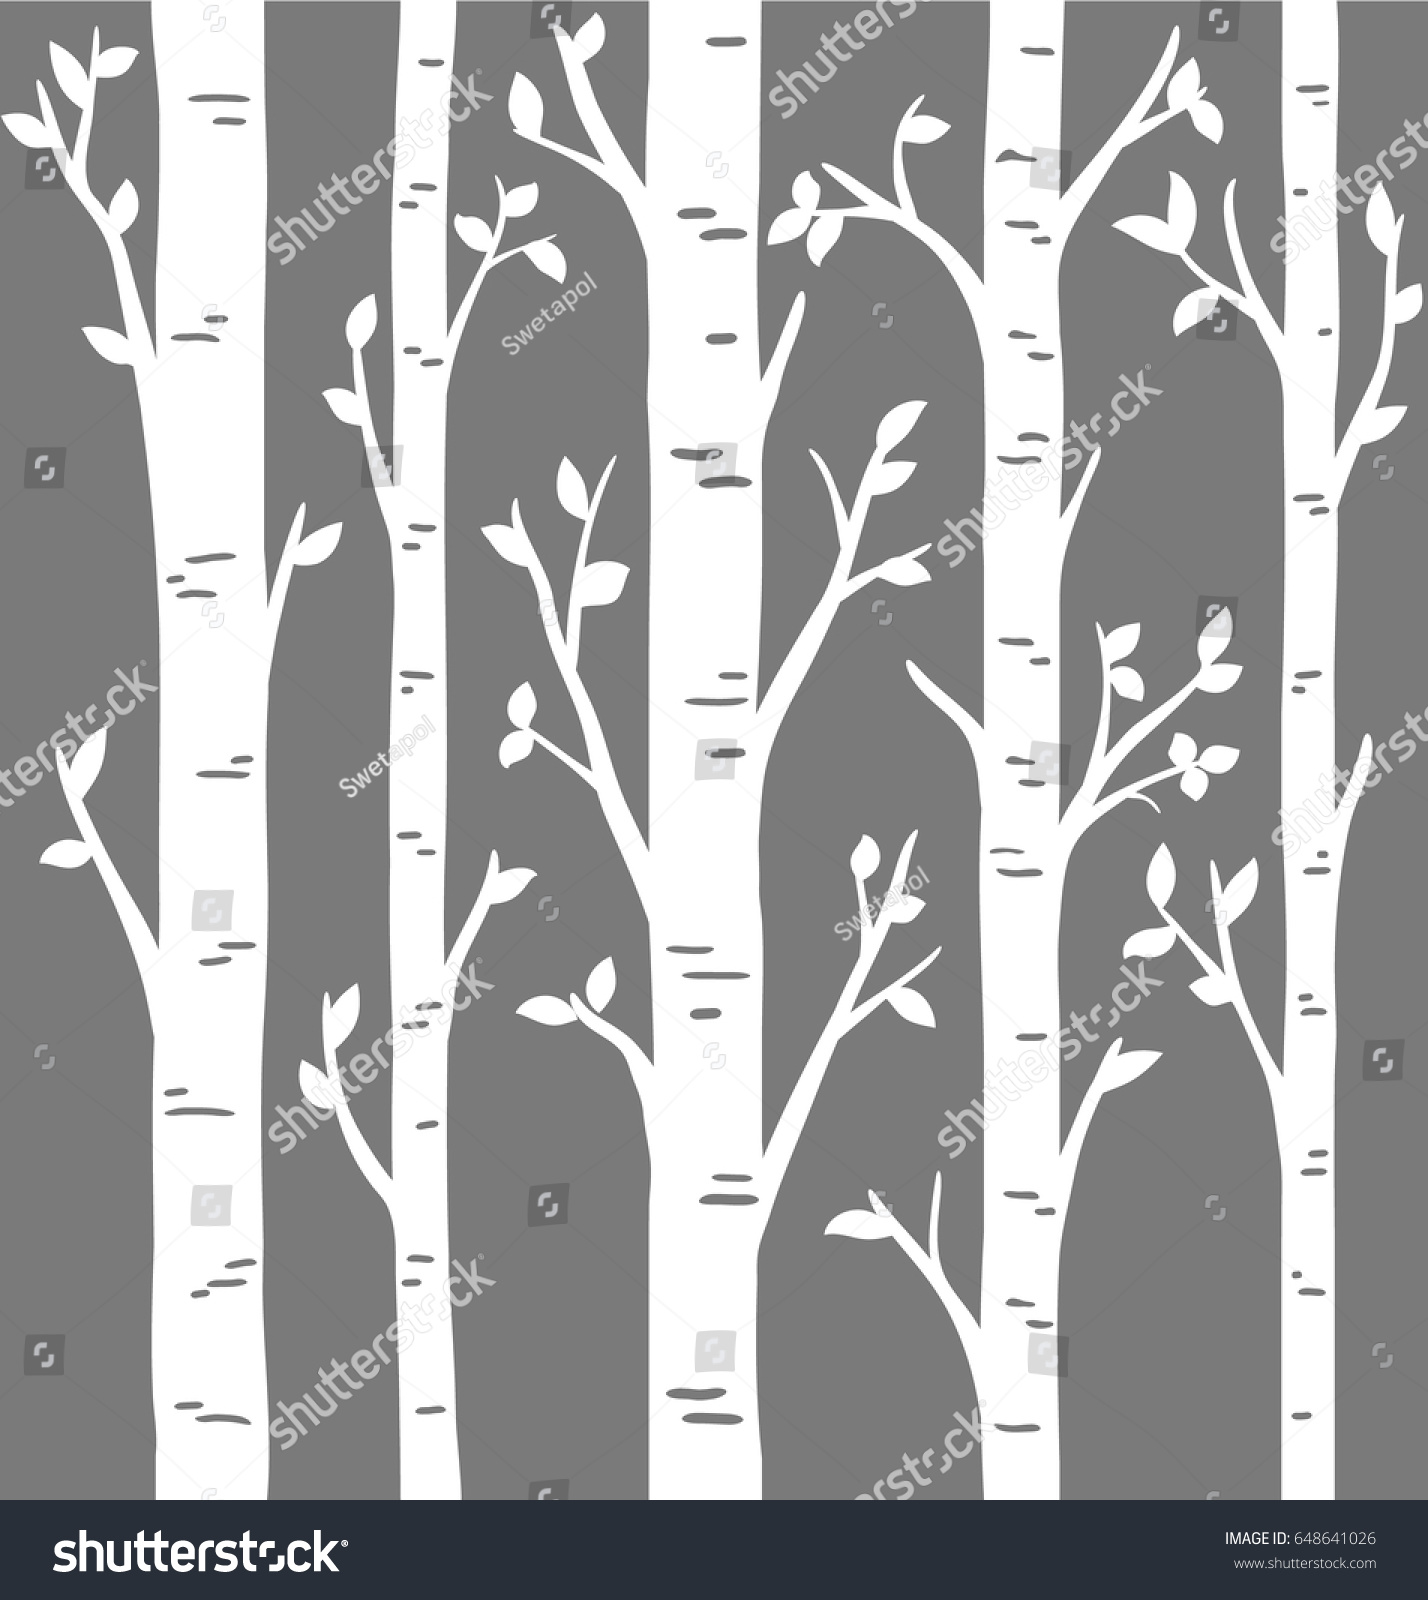 SVG of Birch Grove background for your design. Vector birch or aspen trees with leaves. Set of laser cut birch trees. Pattern suitable for laser cutting or print.  svg